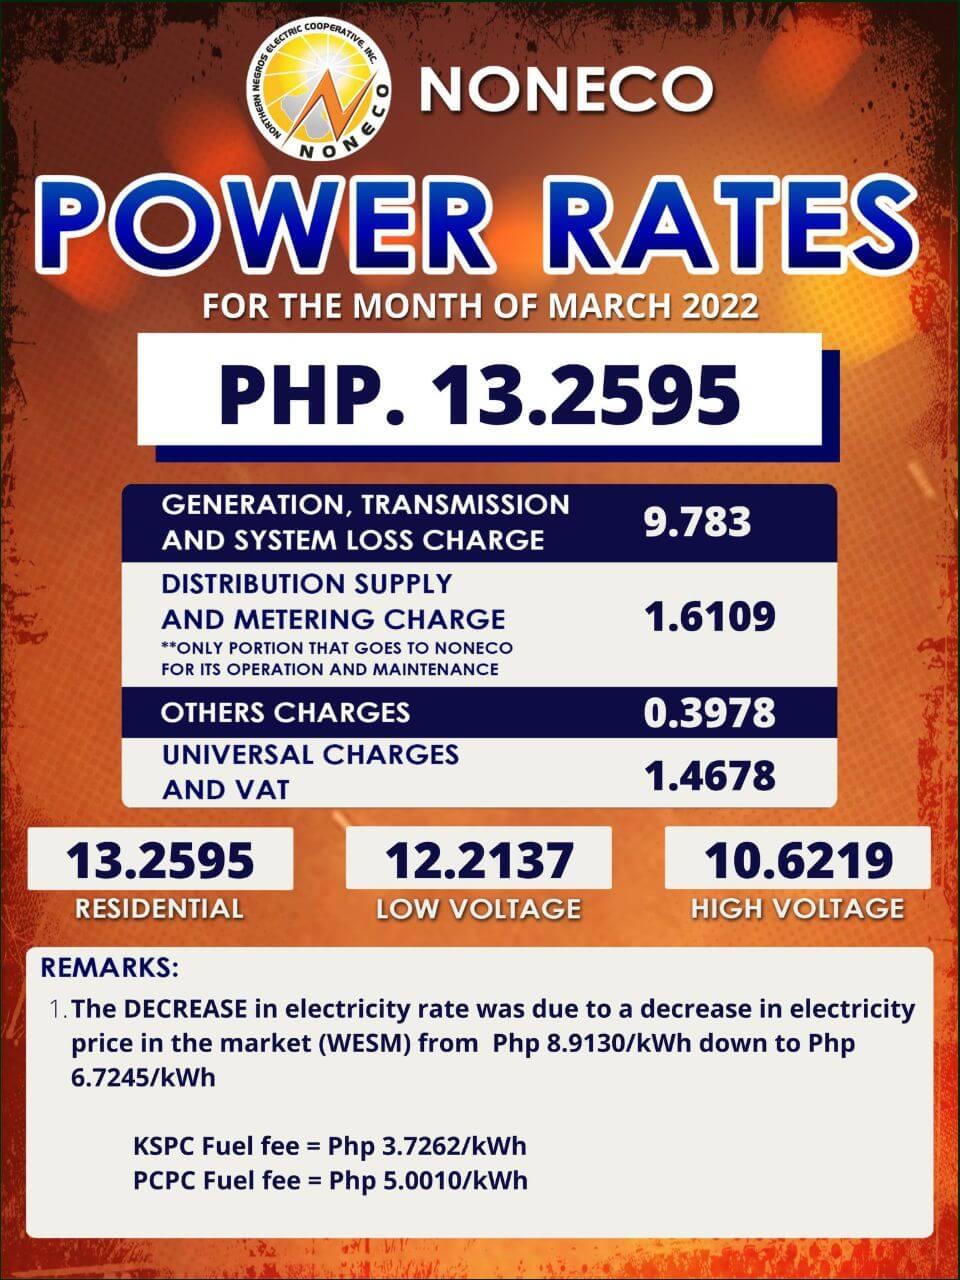 Power Rates for the Month of March 2022